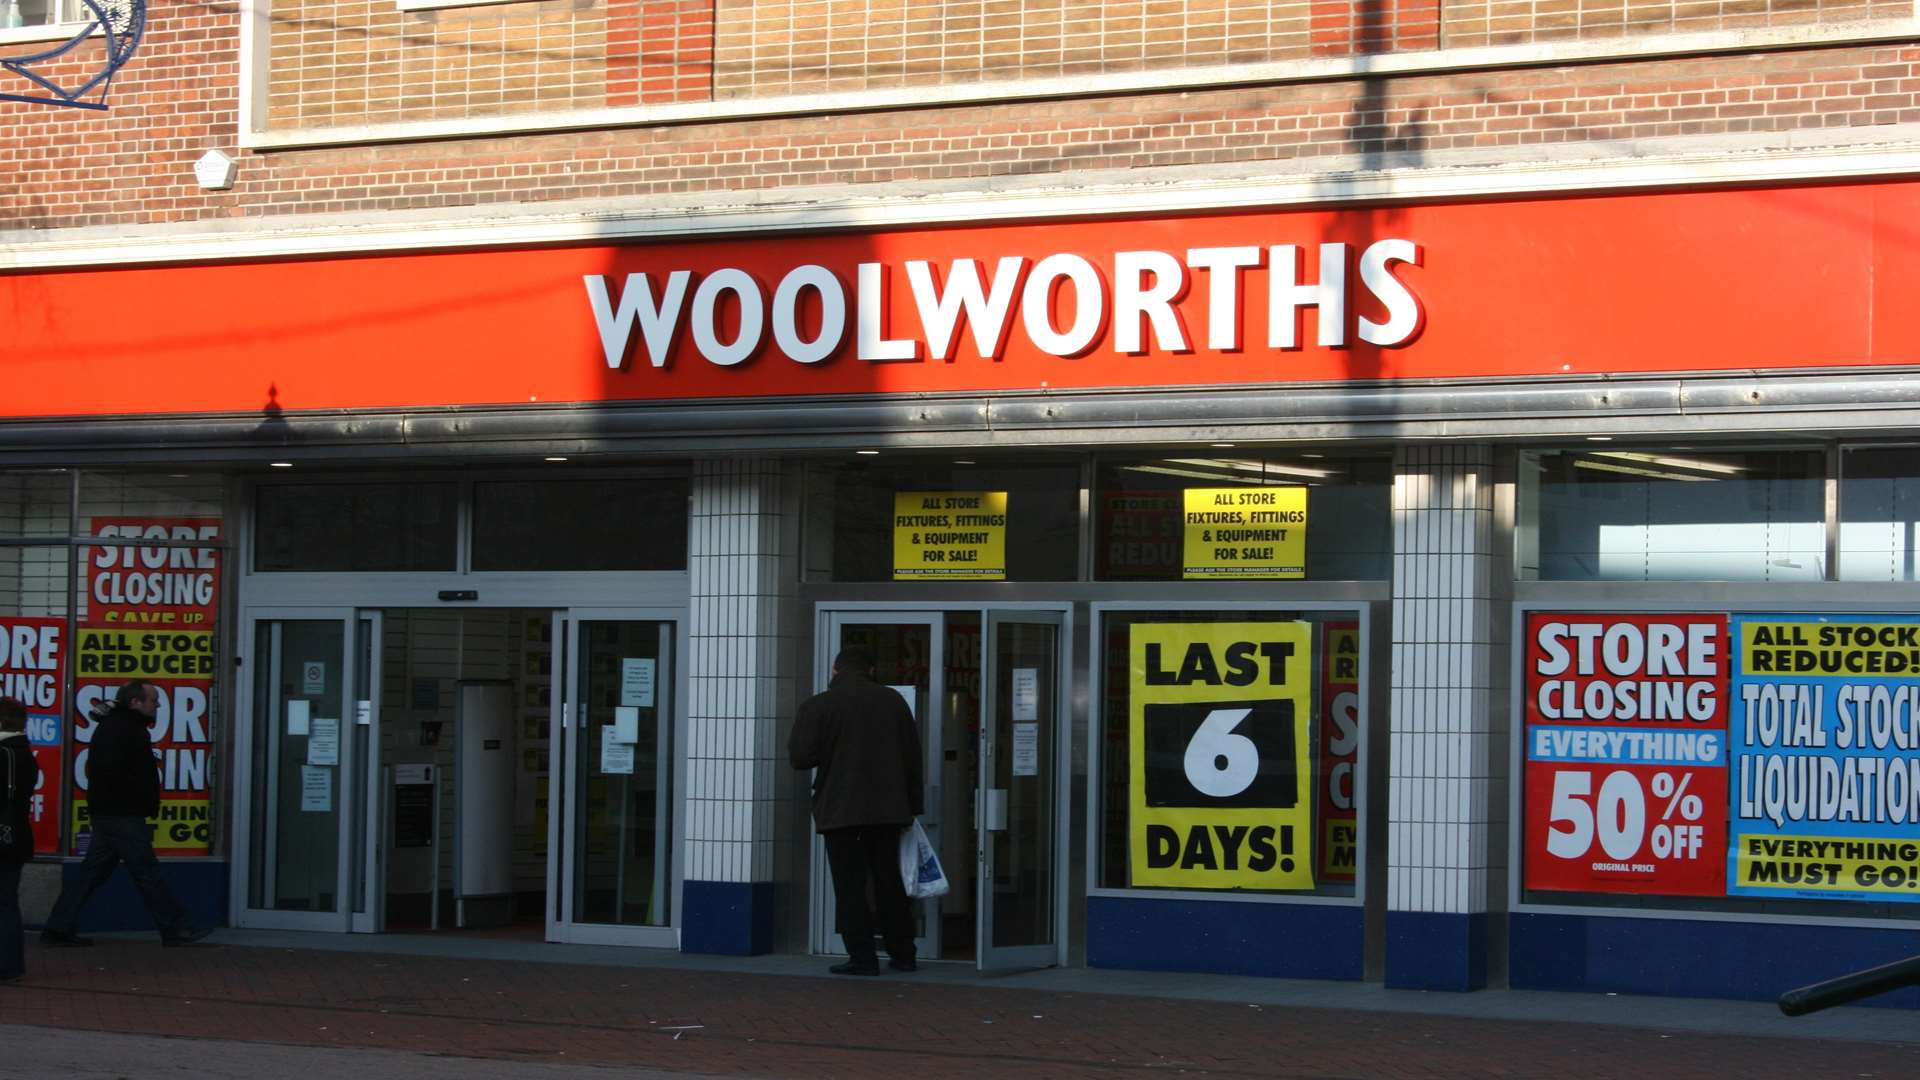 Woolworth's in Ashford High Street, just six days before it shut up shop in 2008